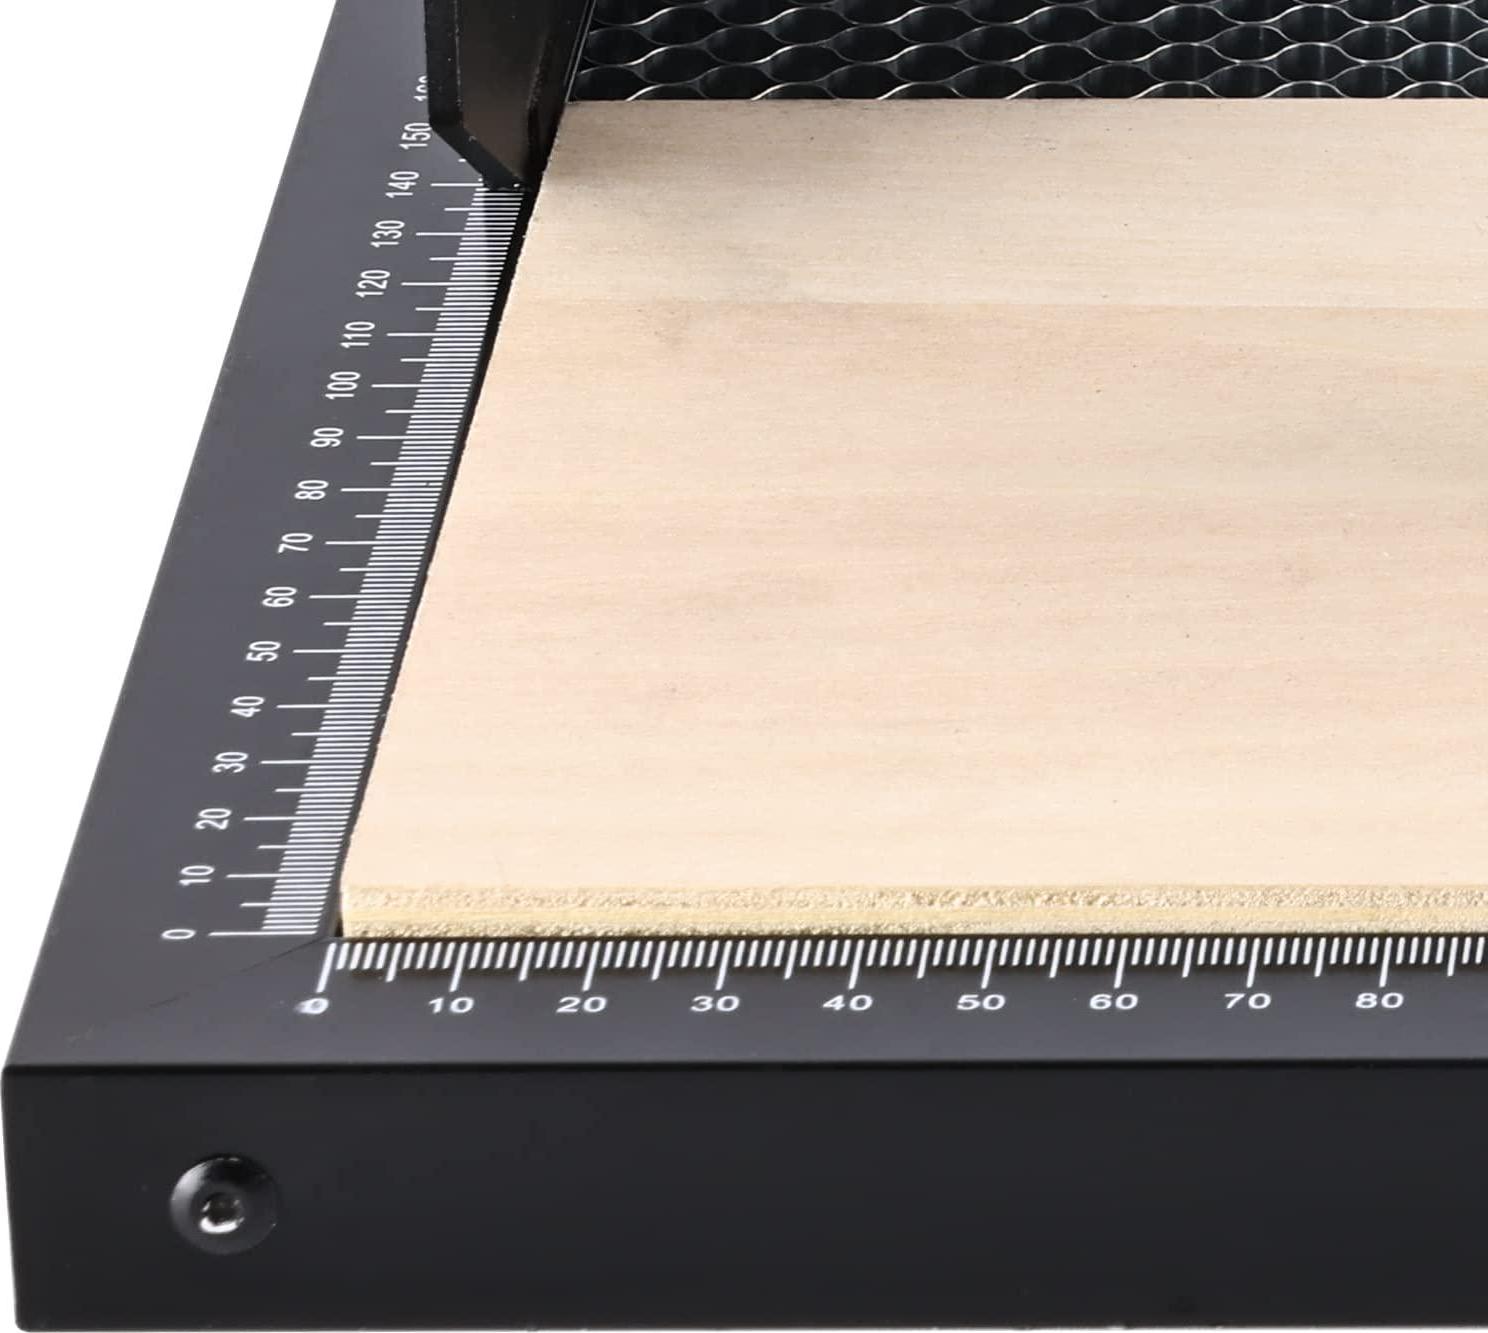 FYGamPage, Laser Honeycomb Table, 400 * 400mm Laser Cutting Bed with Scale Lines for Laser Engraver, CO2 Engraver Cutting Machine, 22mm Higher